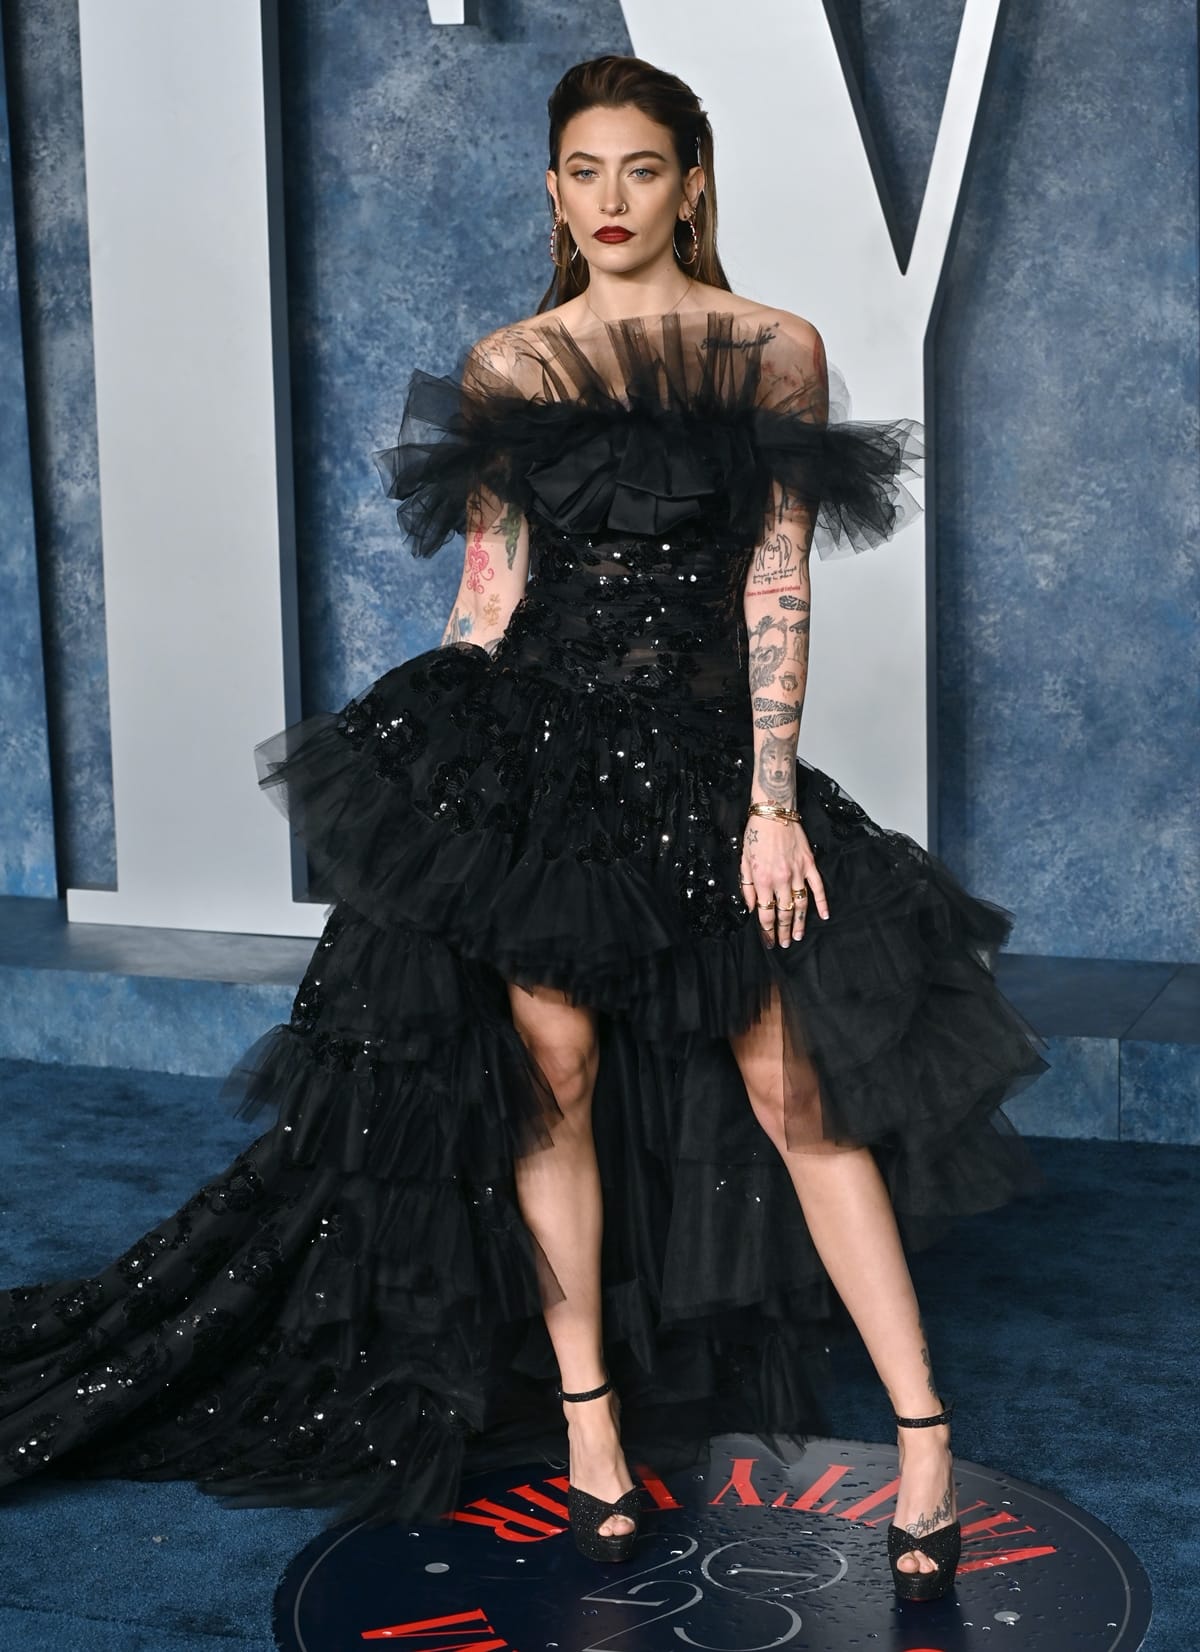 Paris Jackson in a punk rock-inspired outfit with a touch of high fashion at the 2023 Vanity Fair Oscar Party